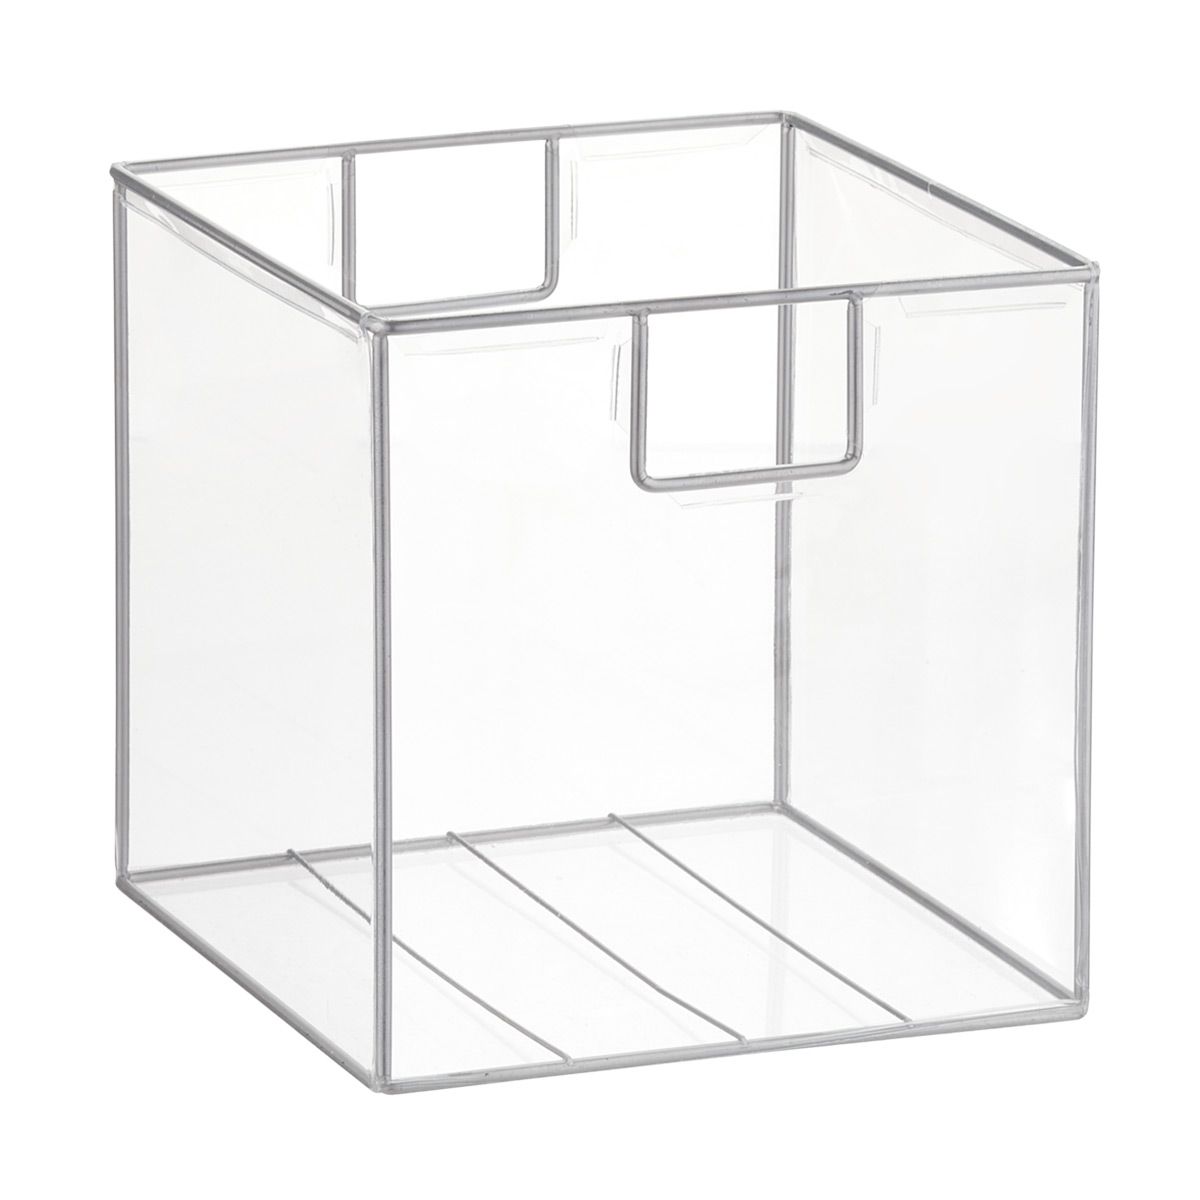 Lookers Cube | The Container Store